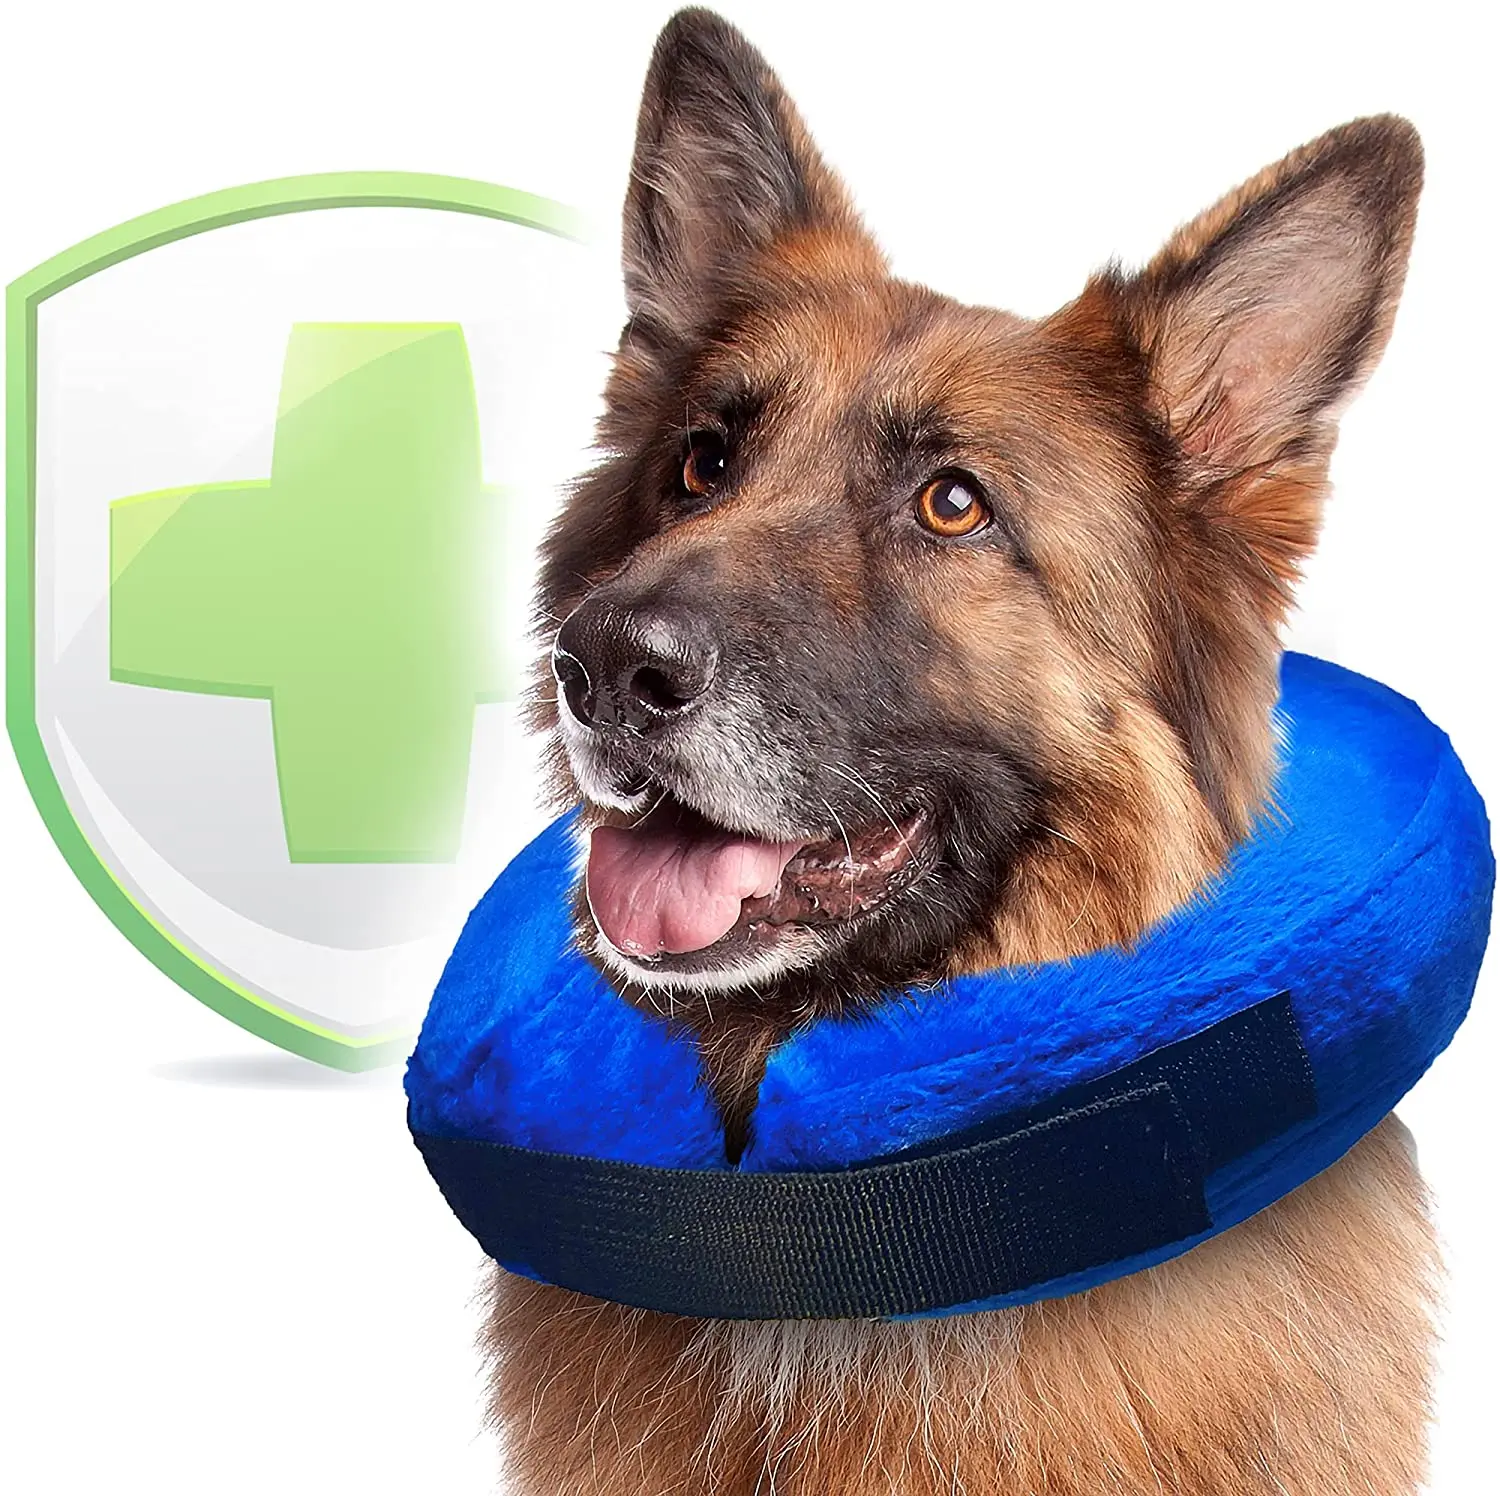 

Amazon Soft PVC Protective Inflatable Collar Pets Cat Recovery E-Collar Elizabethan Dog Cone Collar for Dogs and Cats